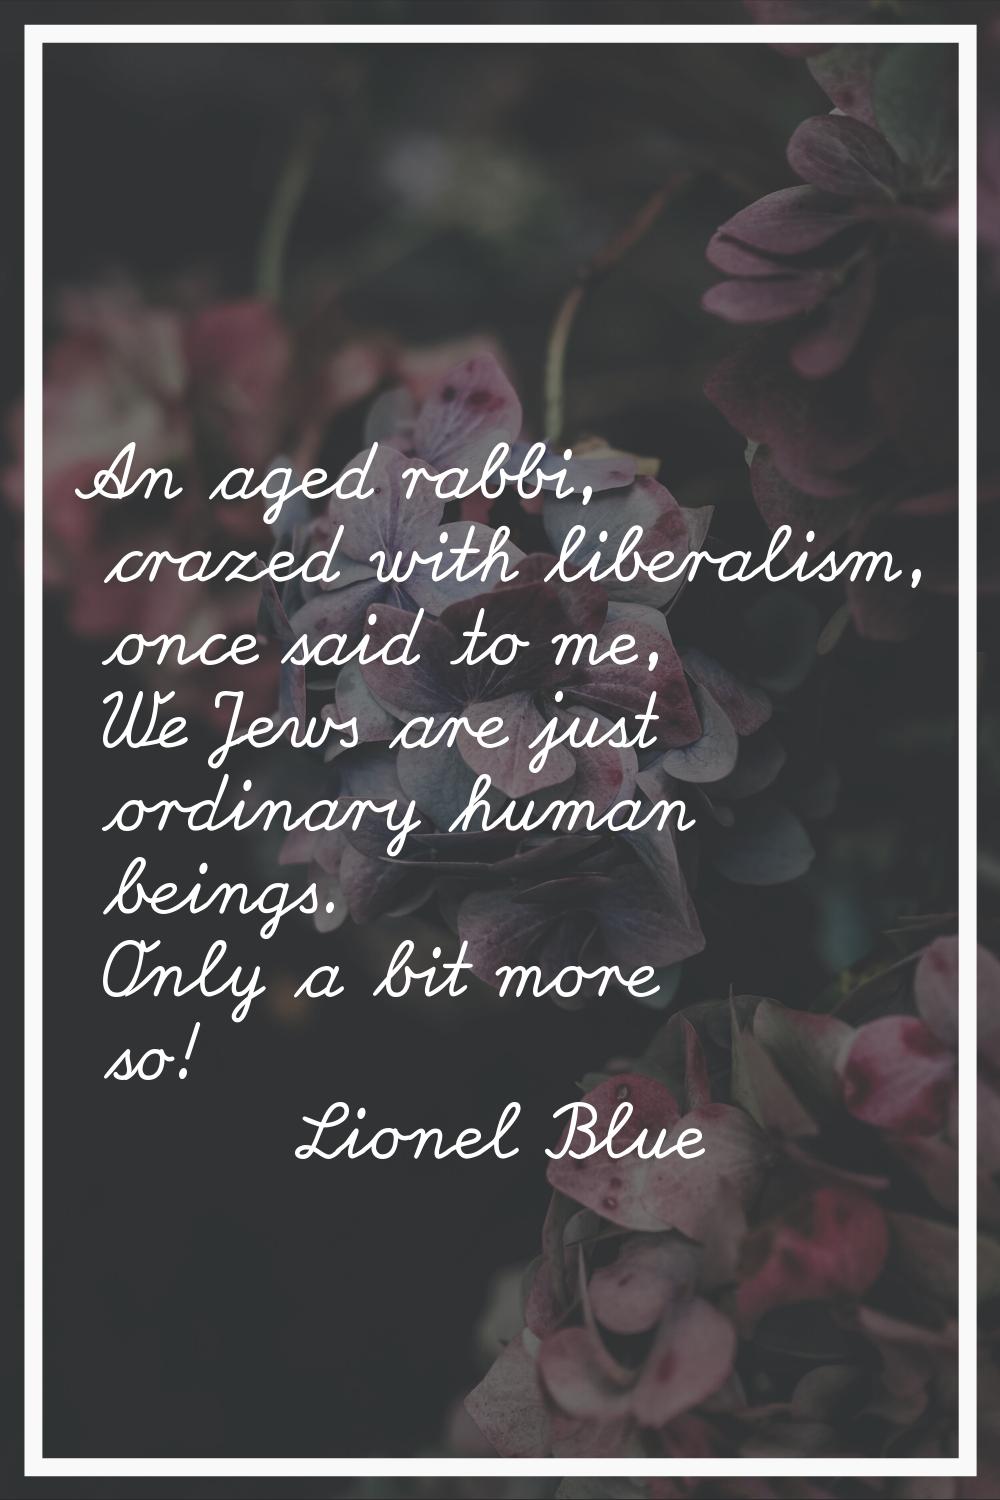 An aged rabbi, crazed with liberalism, once said to me, We Jews are just ordinary human beings. Onl